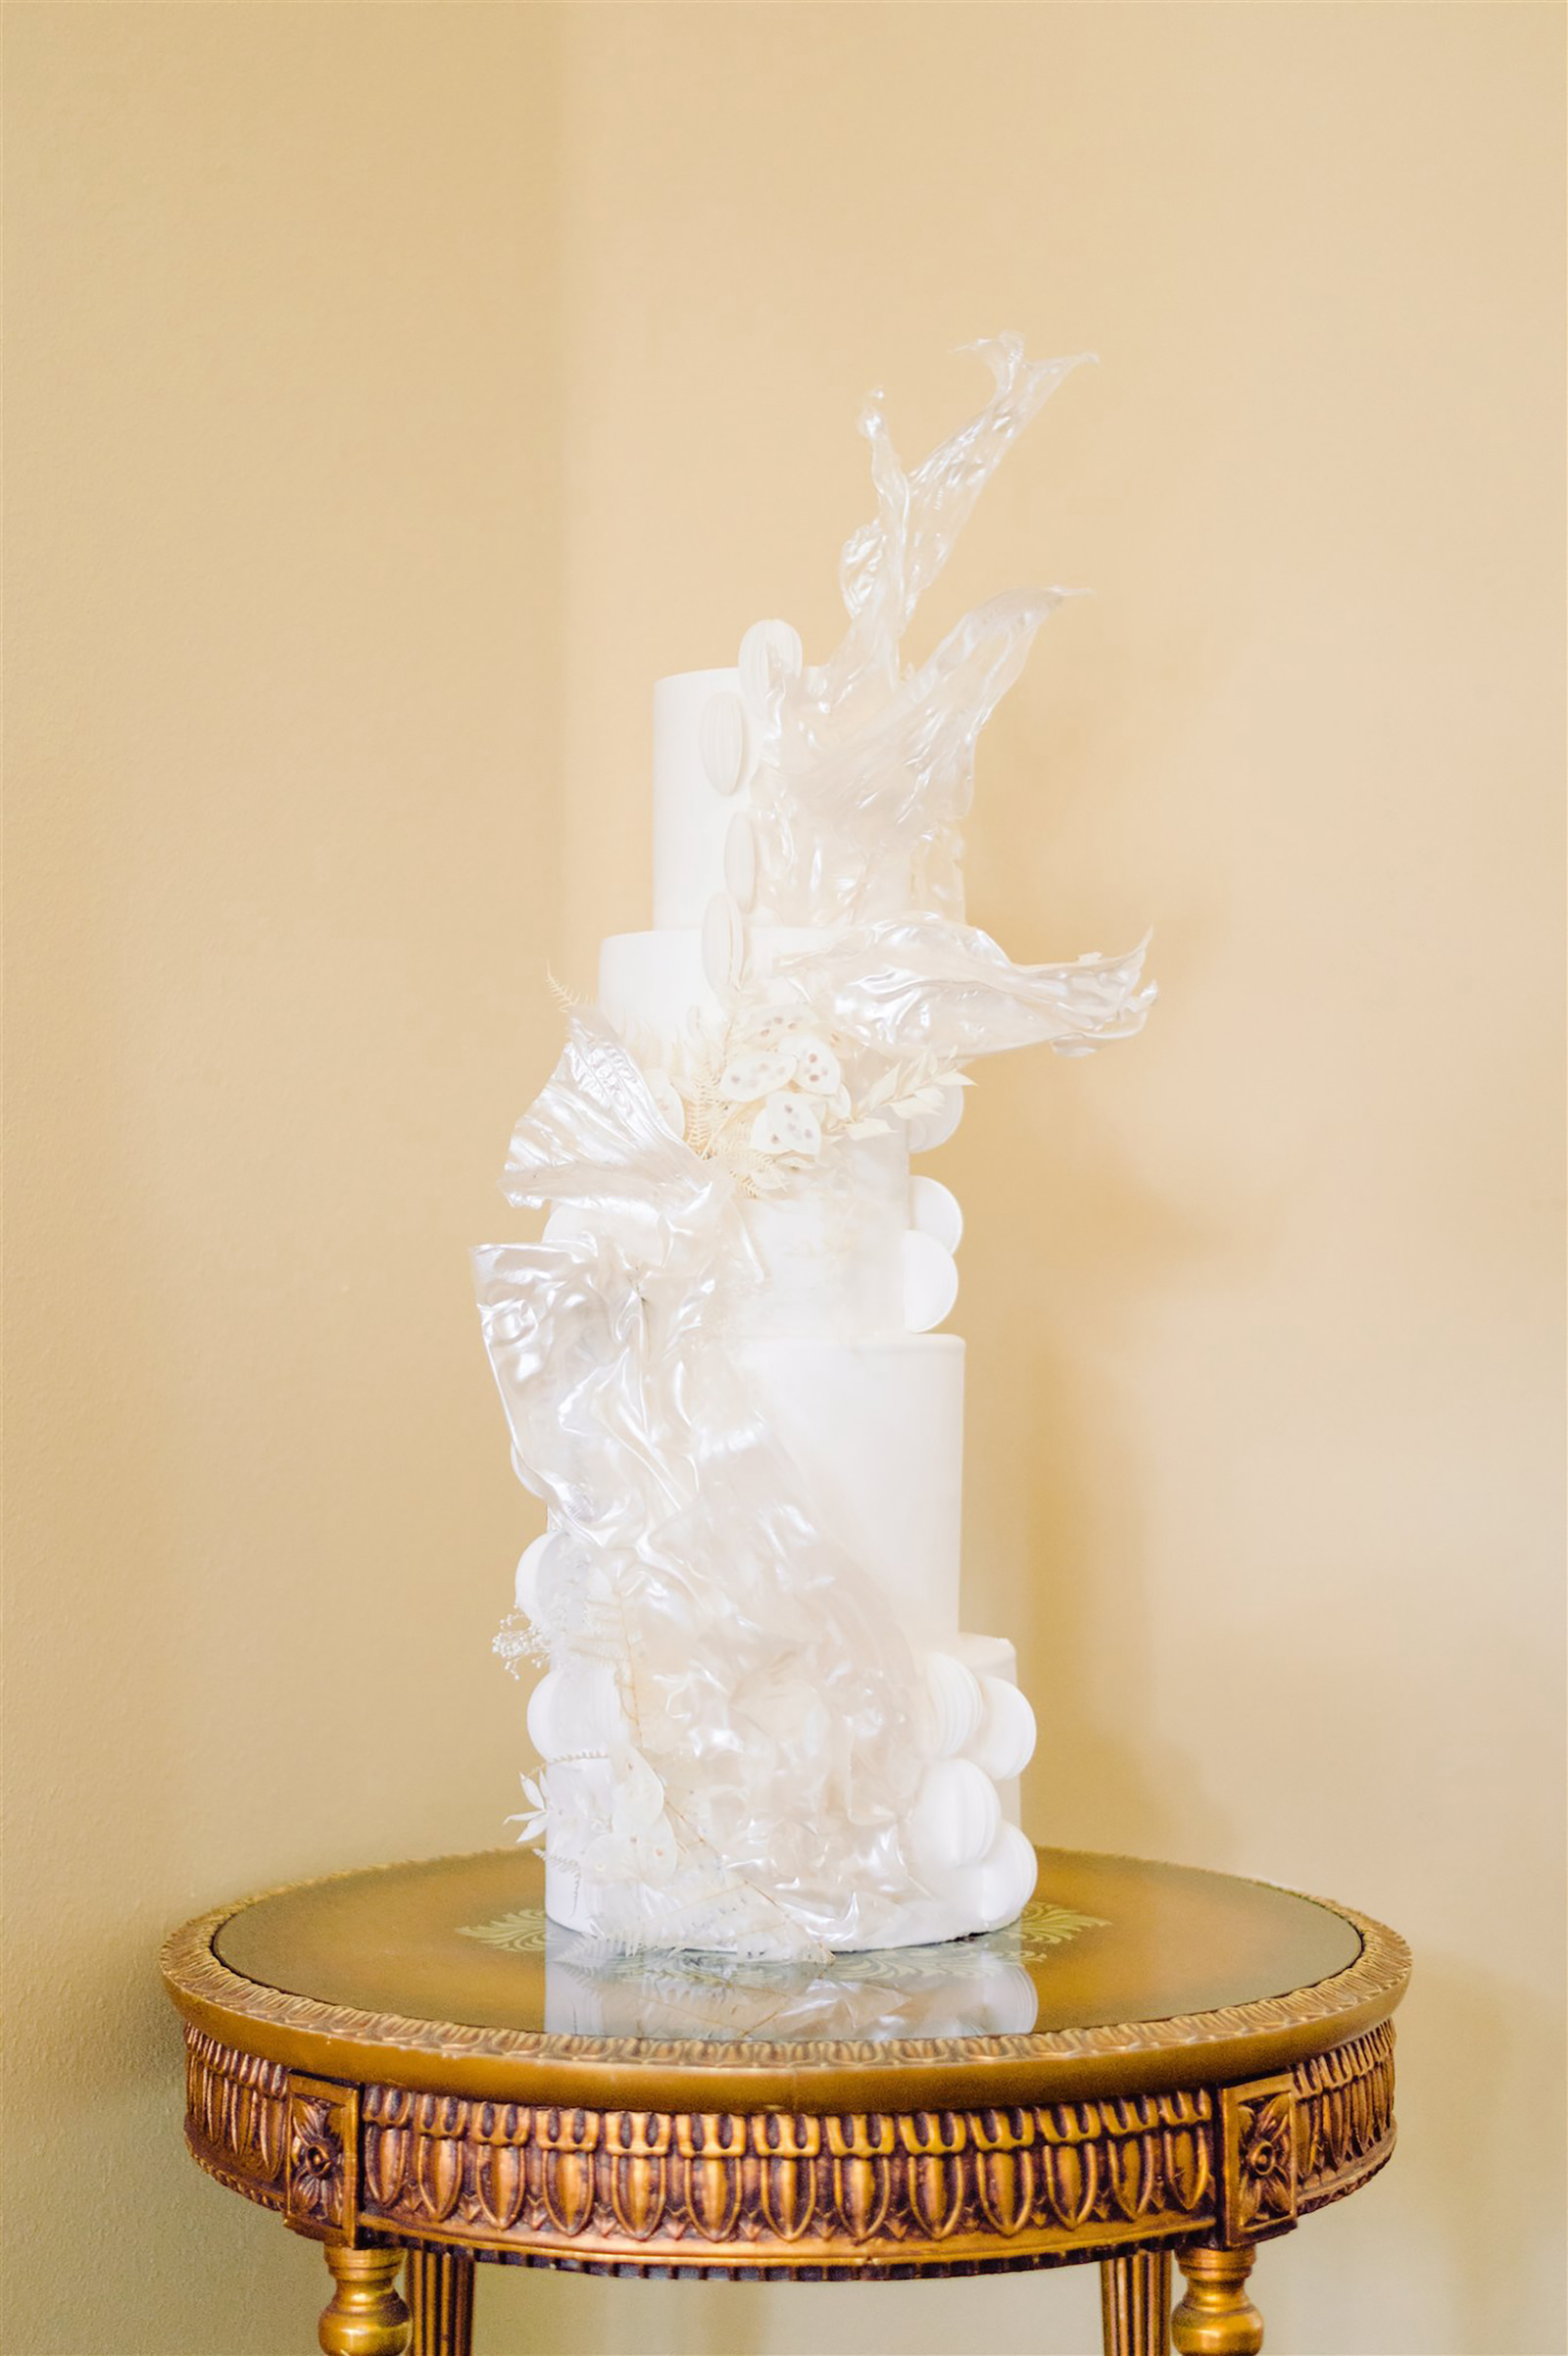 Modern All White Wedding Cake with Sugar Sculpture from Tampa Bay Baker The Artistic Whisk